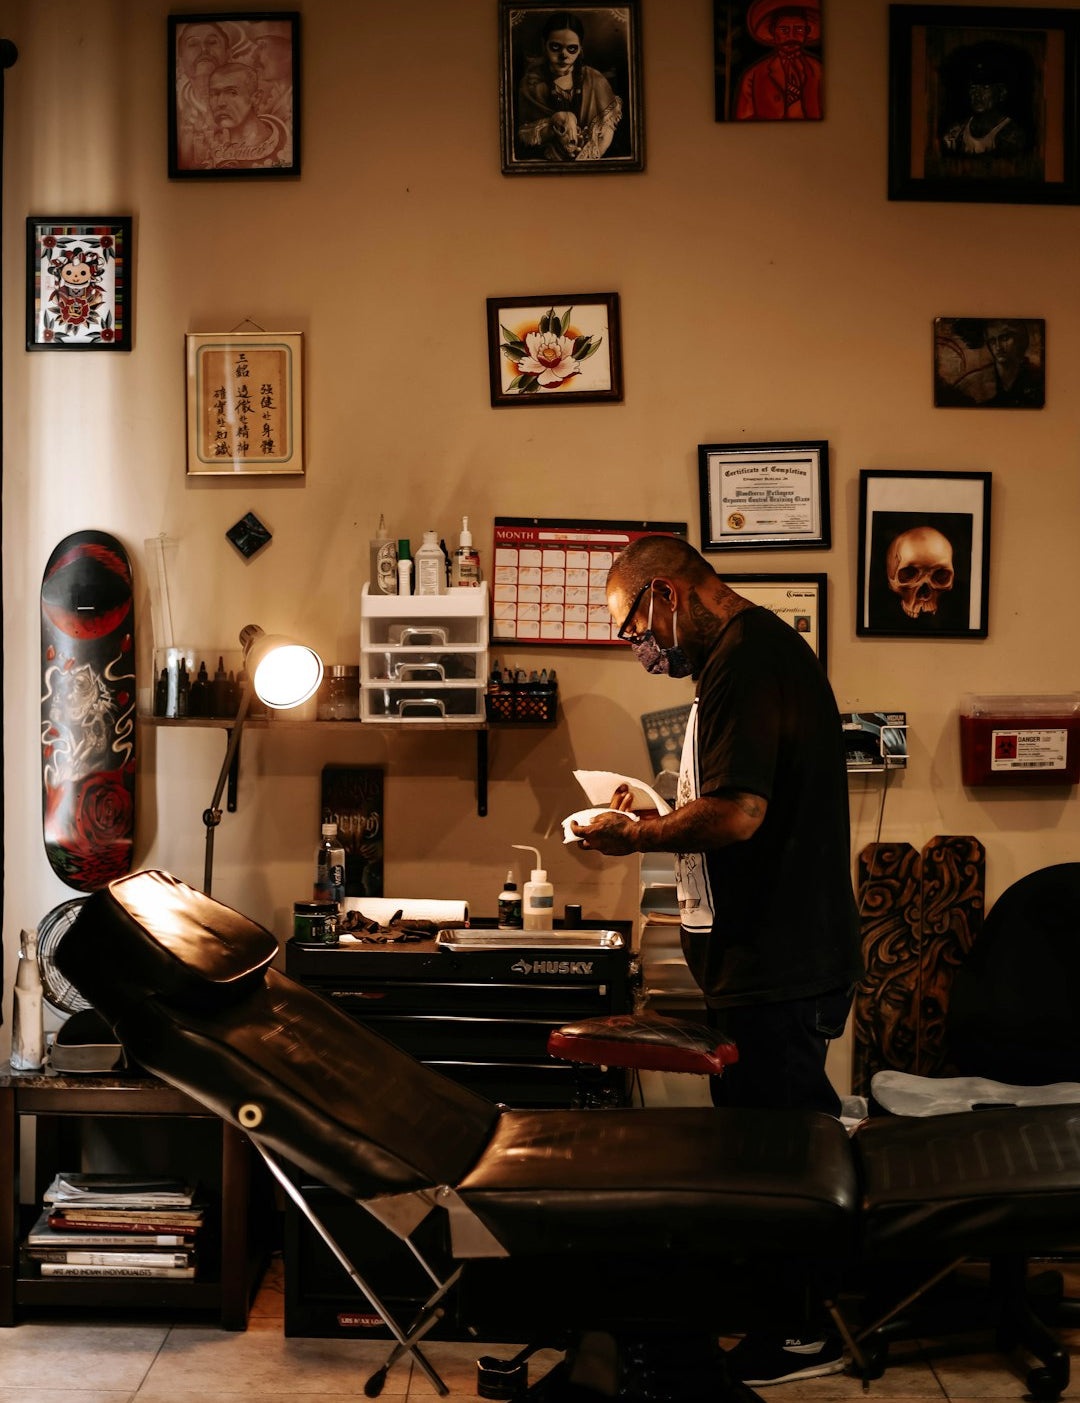 Tattoo Artist Interview: Behind the Scenes with a Tattoo Professional